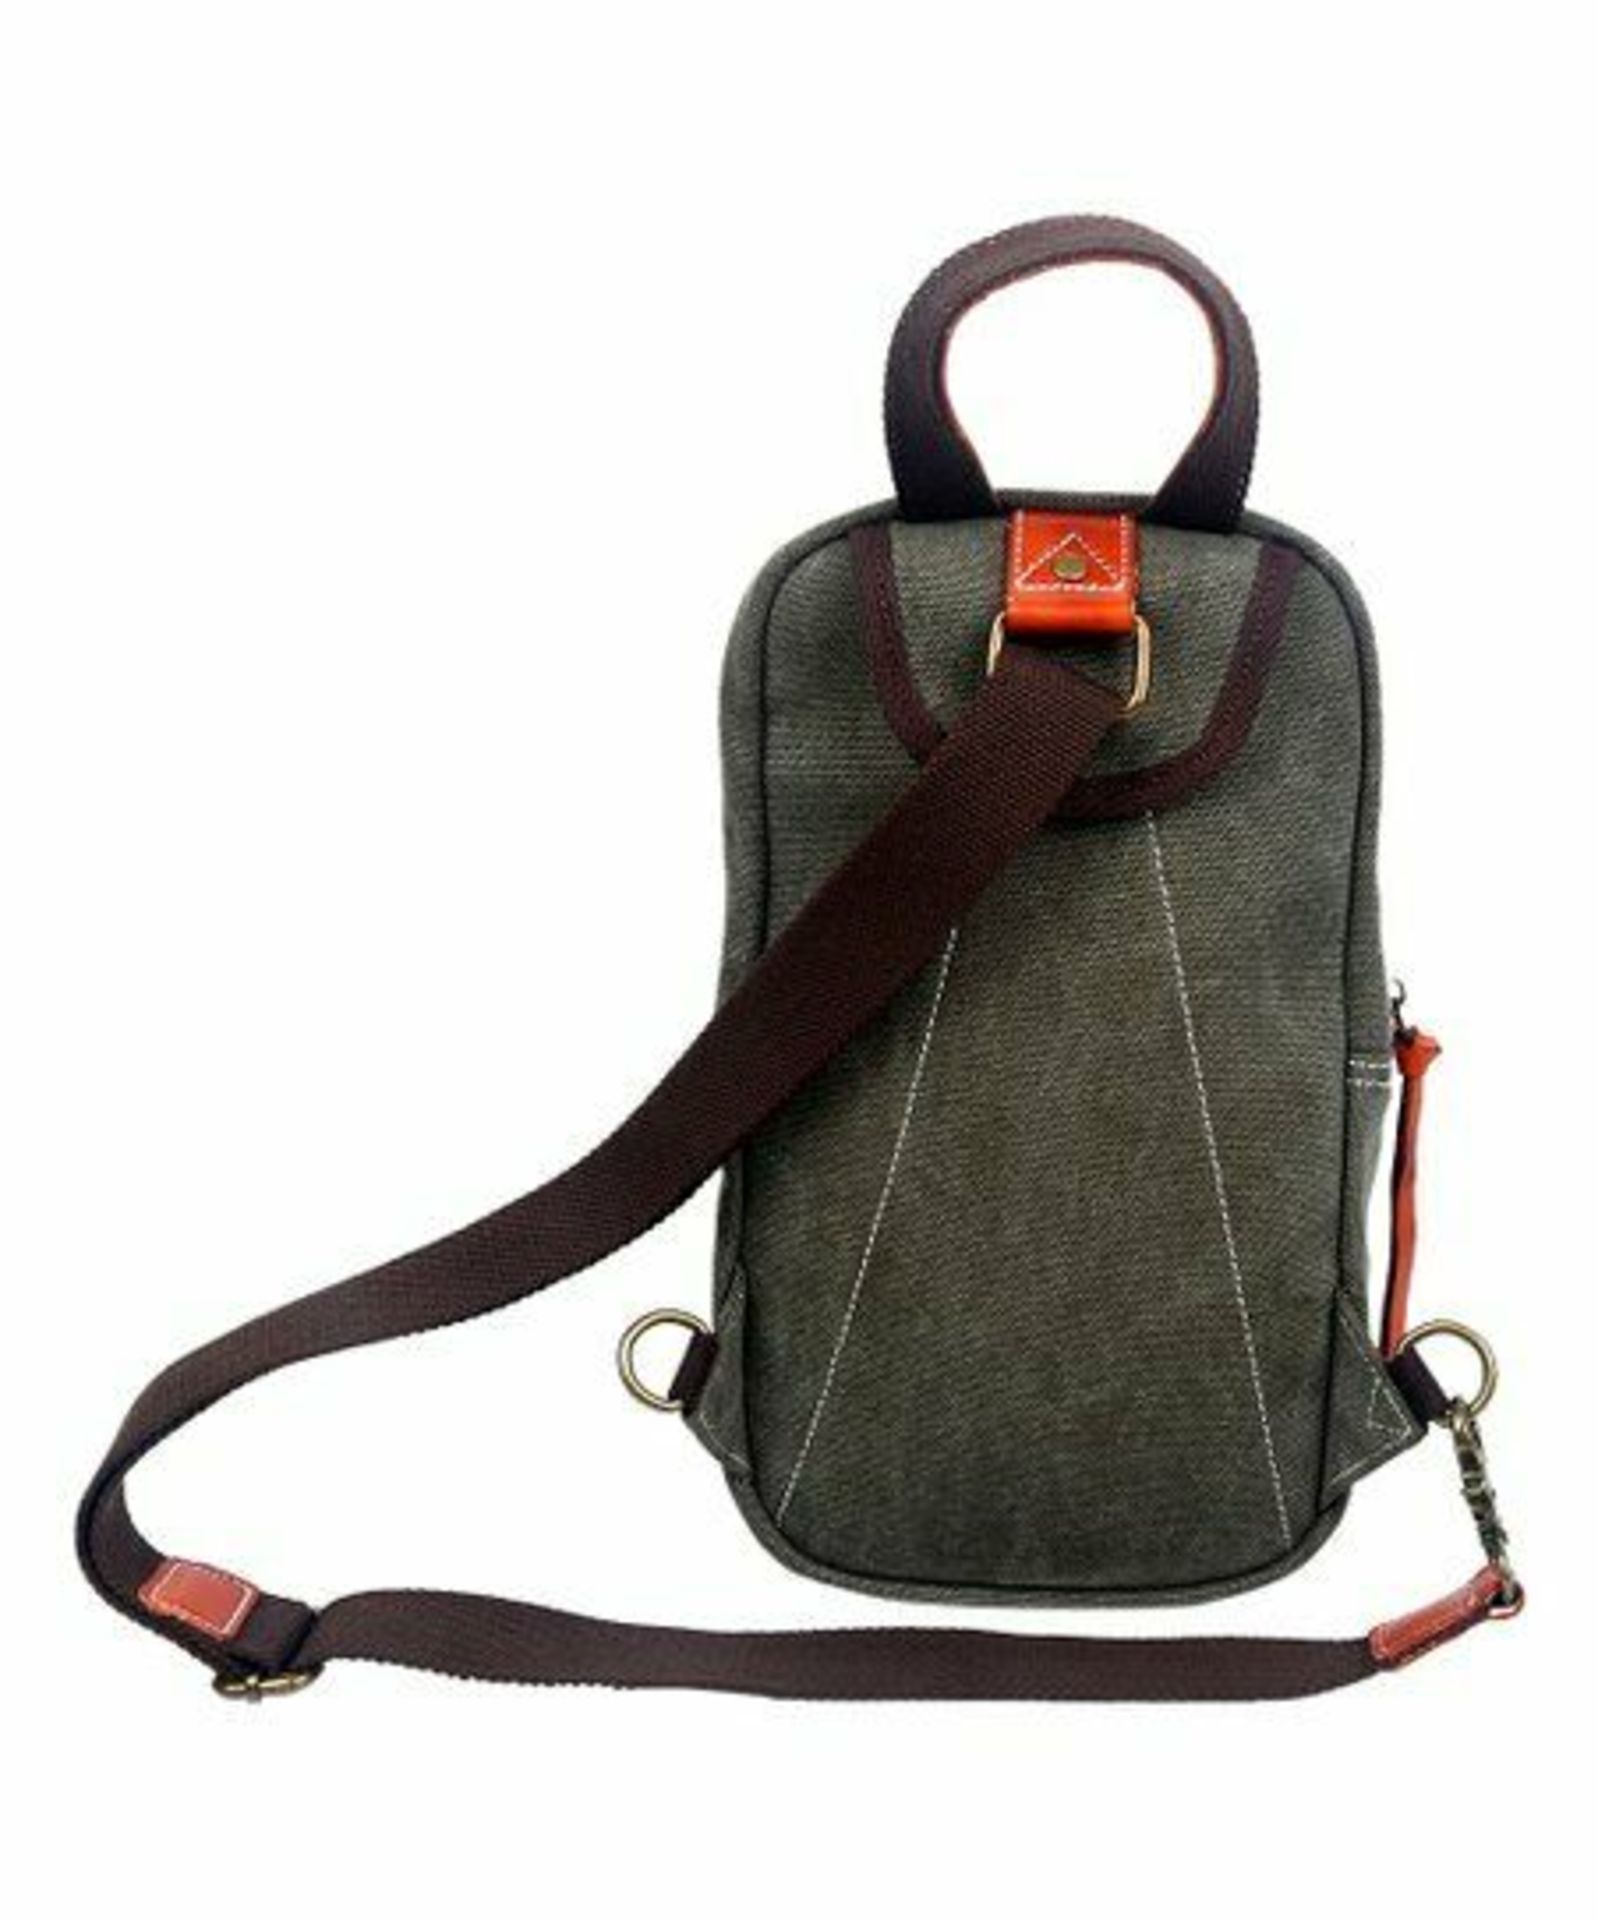 Tsd Brand Olive Four Season Canvas Sling Crossbody Bag (New With Tags) [Ref: 53760893-Tf-Tub 3-Tf] - Image 2 of 3